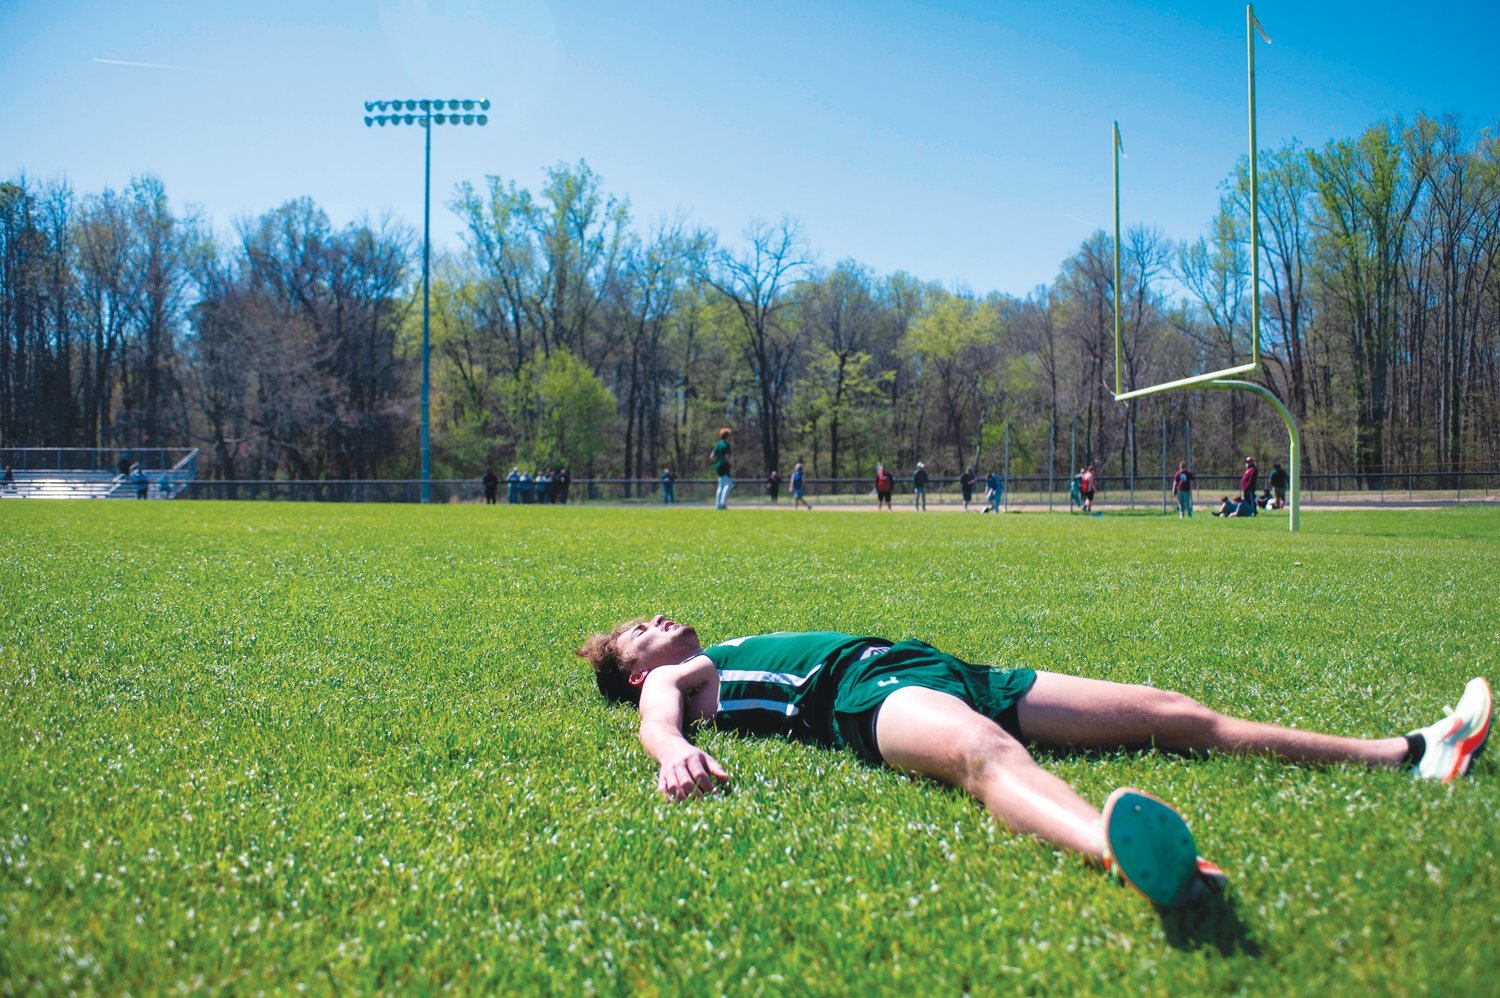 Northwood senior Colin Henry lies in the grass to catch his breath following a relay event on Saturday at the Chatham County Invitational. Henry took first place in the men's 800-meter run (2:15.76) and was part of the first-place men's 4x800-meter relay team that contributed to the Chargers' sweep of the men's relay events.